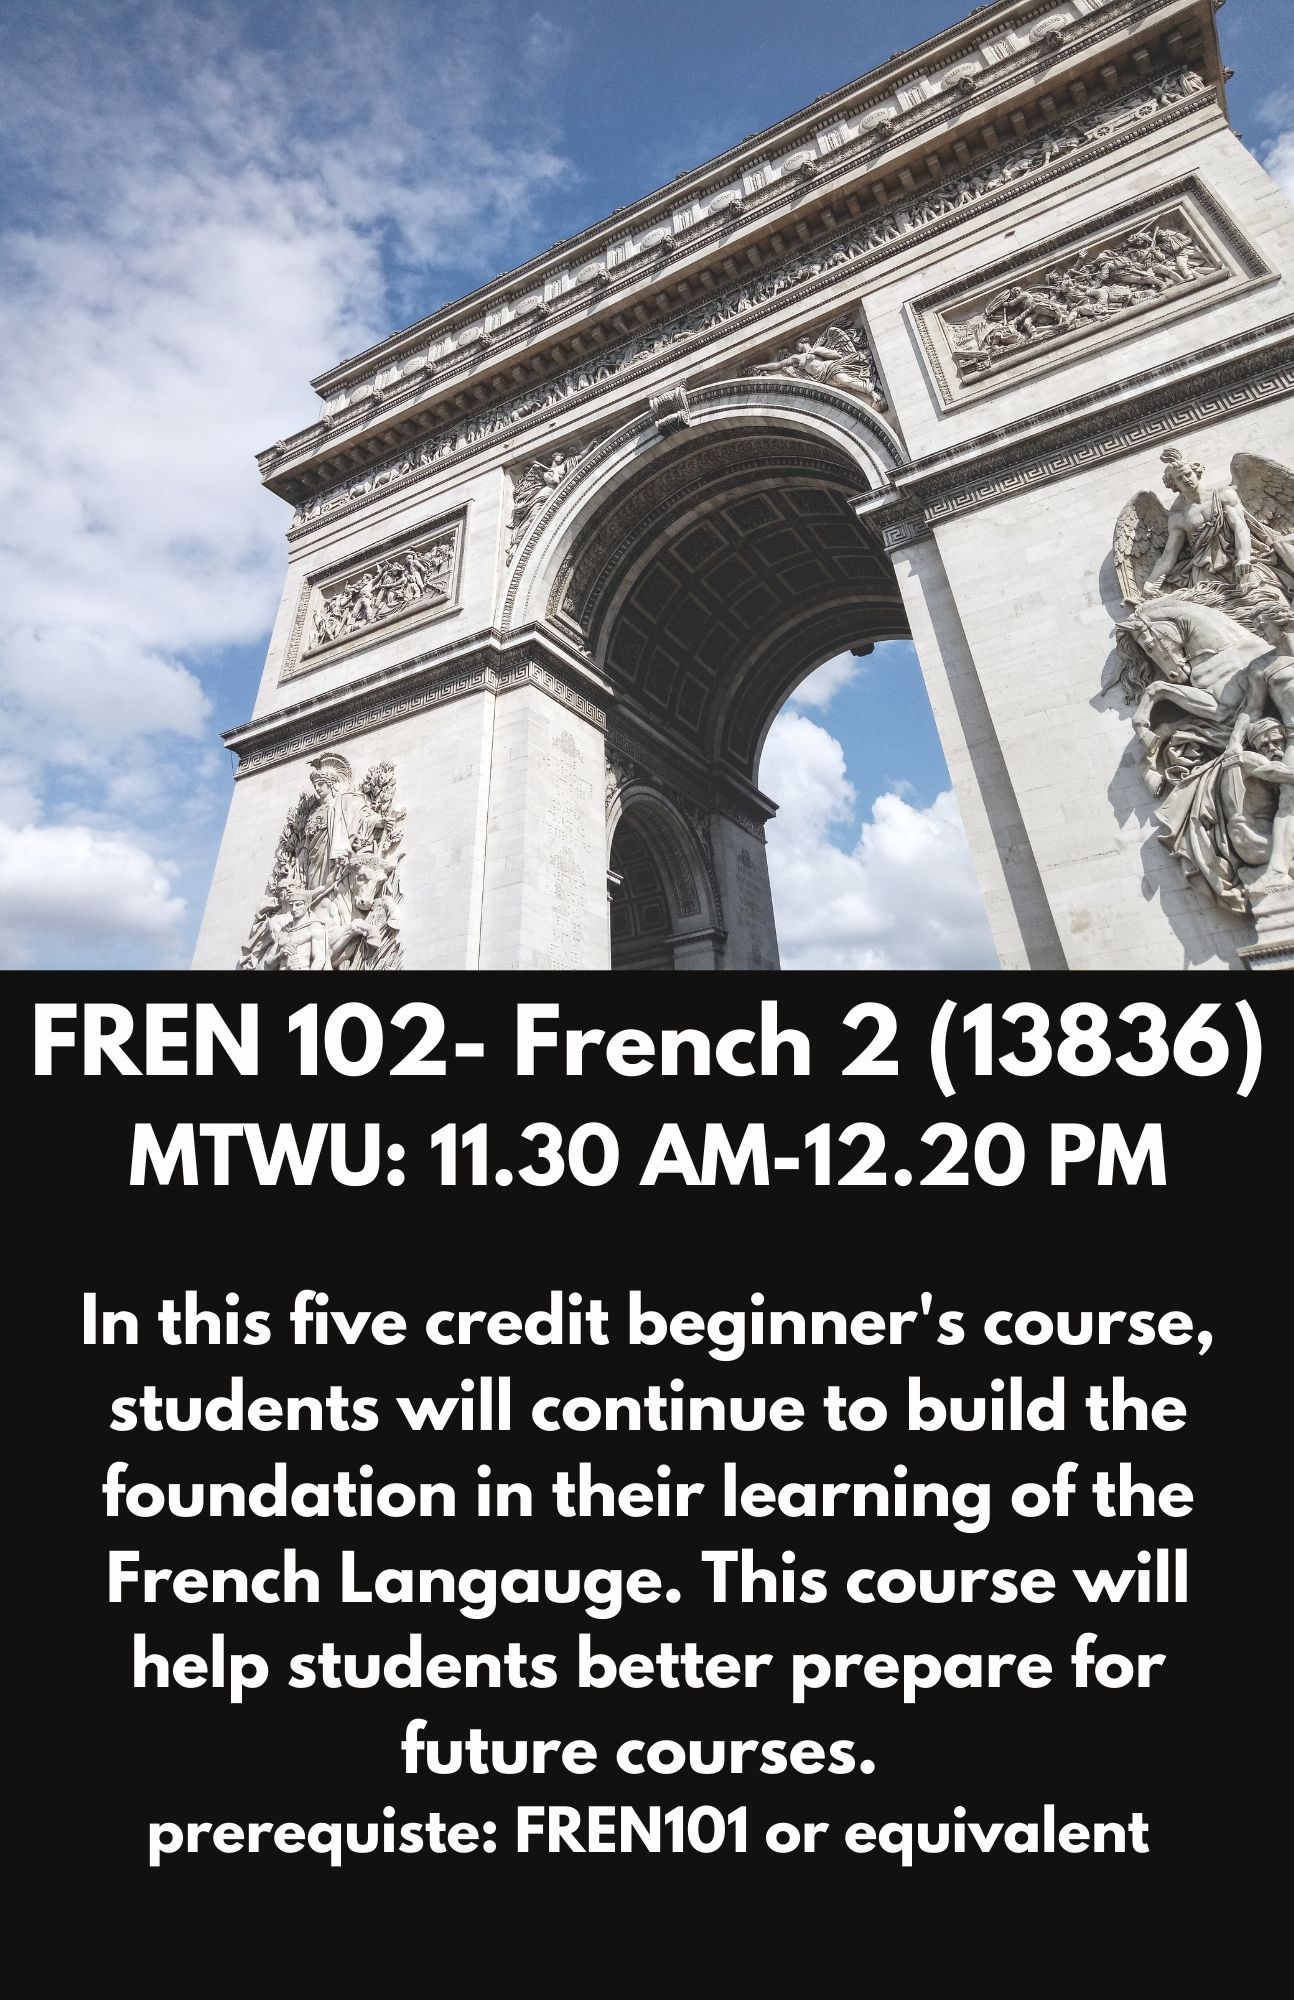 FREN 102- French 2 (13836). MTWU: 11.30 AM-12.20 PM. In this five credit introductory course students will learn the basic of the French Language, including grammar, simple senetences, and basic conversational French. No prior knowledge of French is needed in oder to take this course.